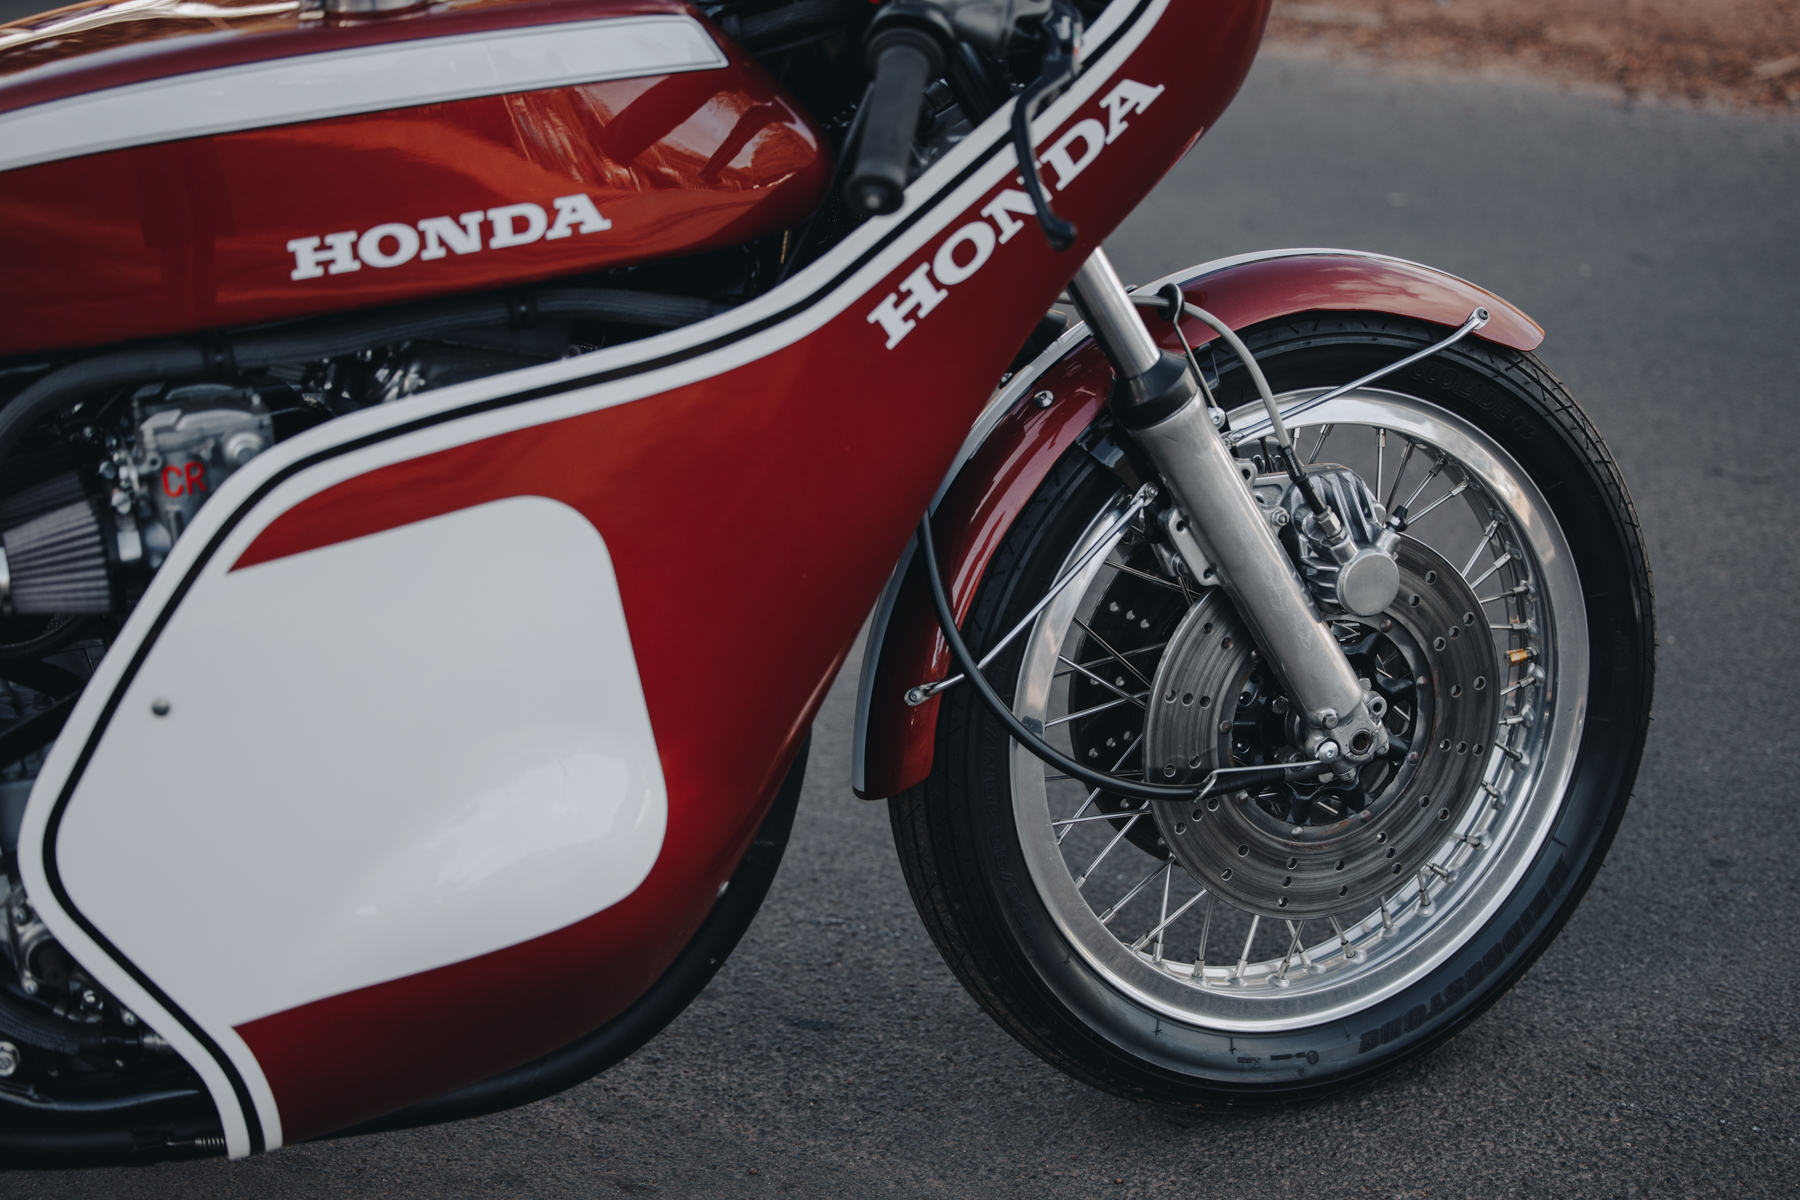 Detail photo of a red Honda CR750 motorcycle front wheel